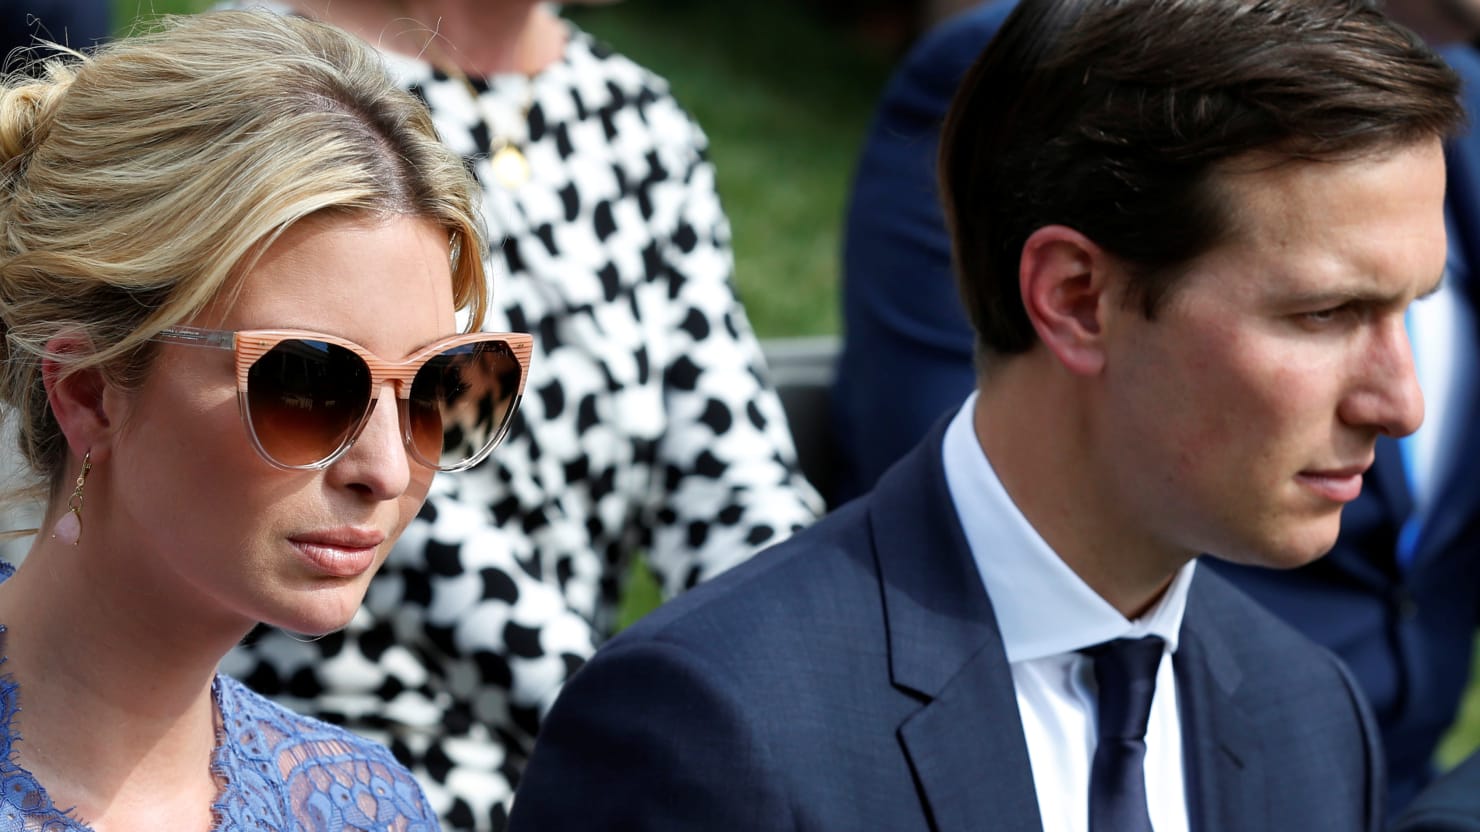 Report: Jared, Ivanka Had Third Personal Account for White House Emails